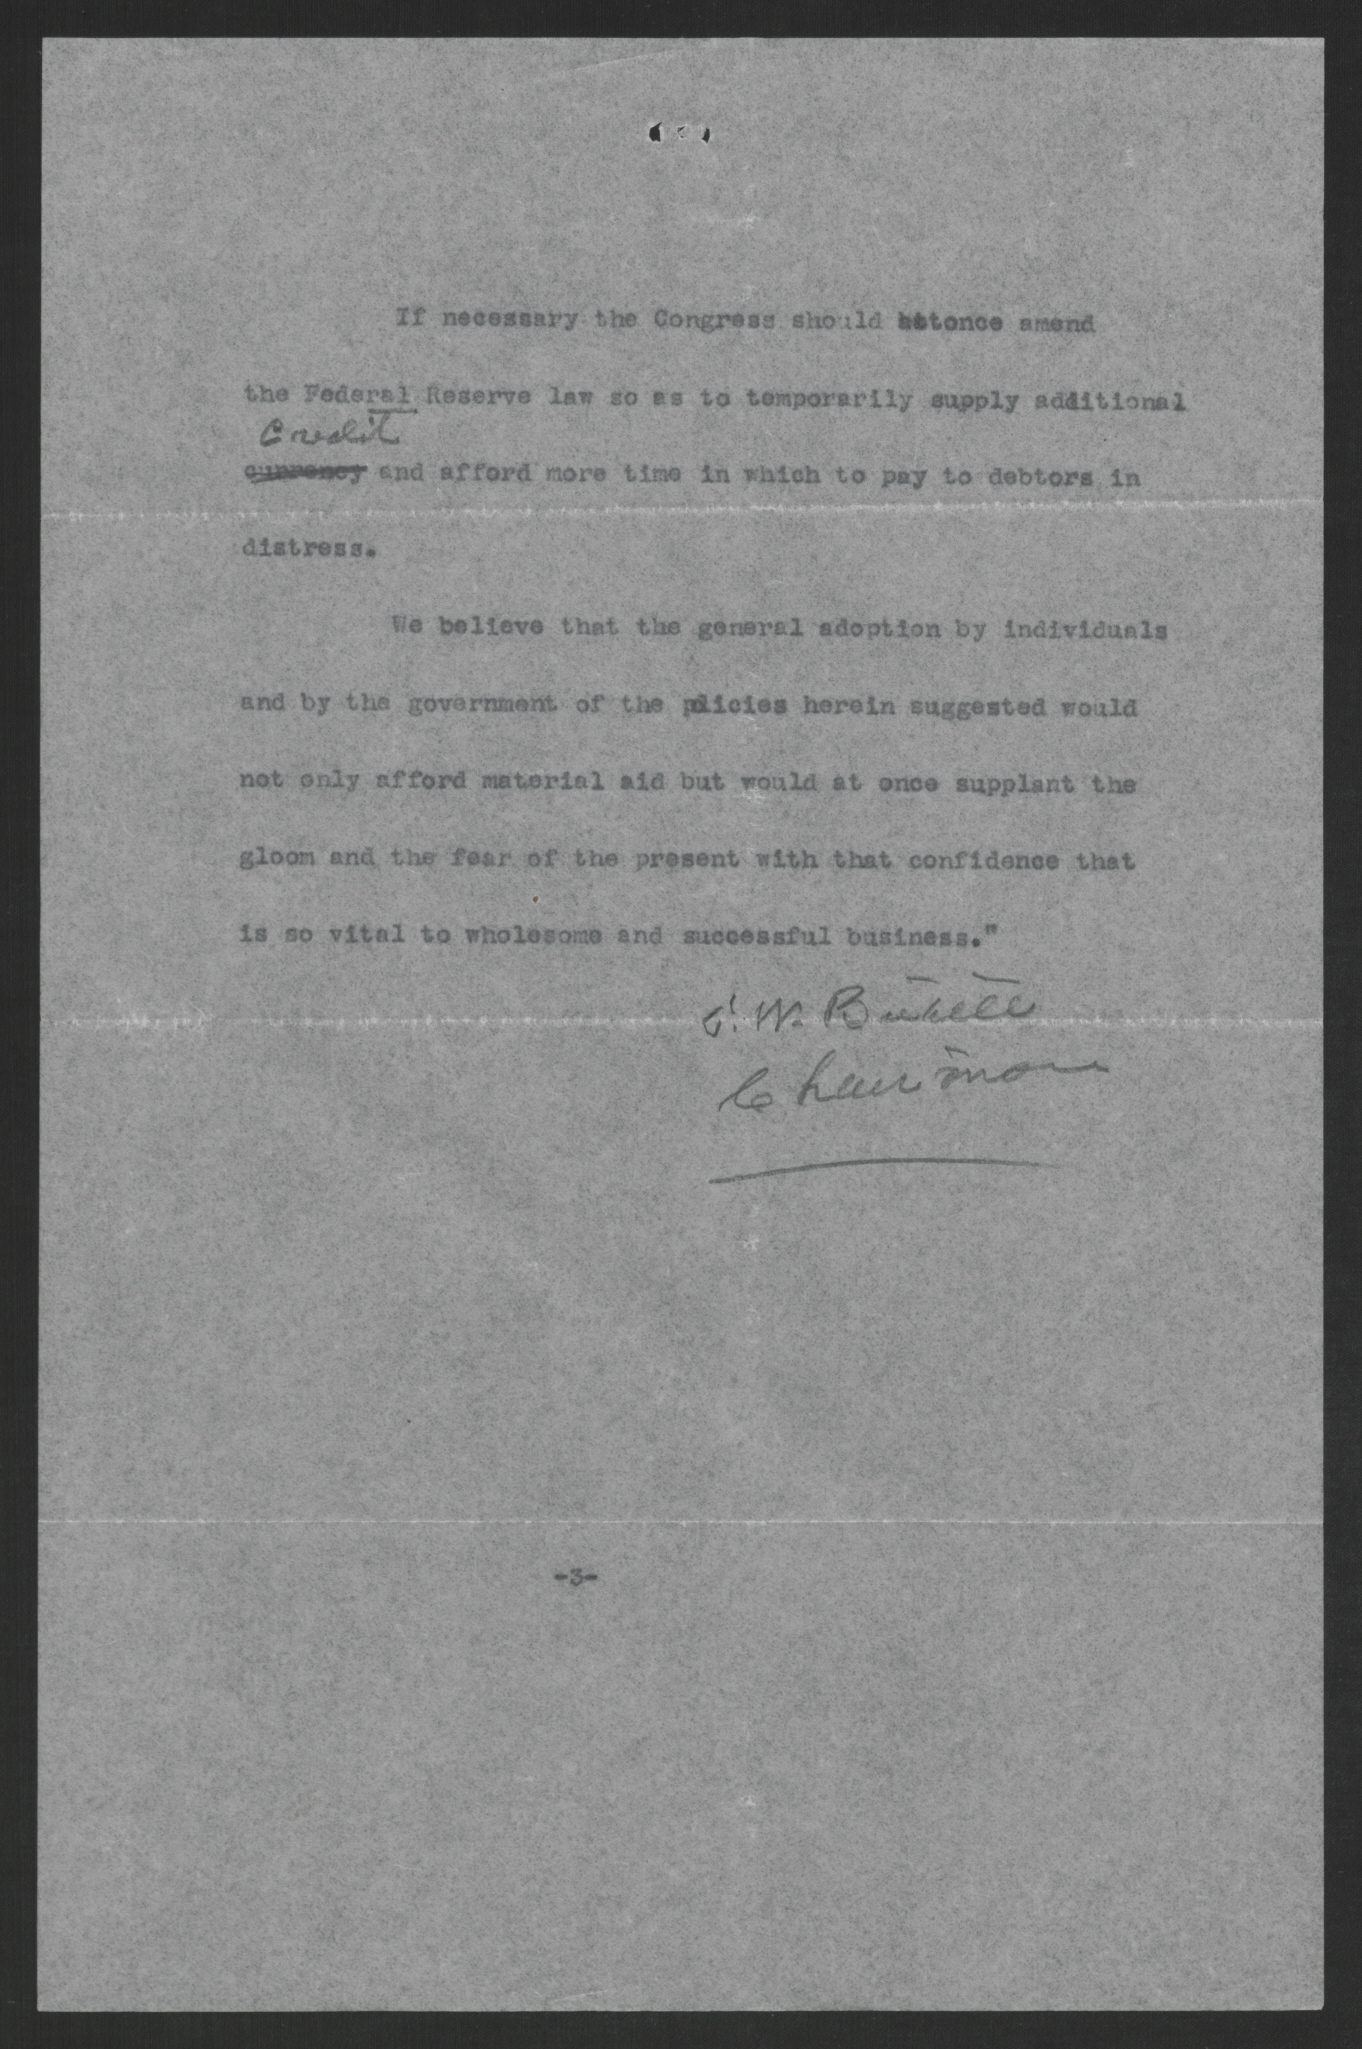 Statement by the Governors' Conference on the Nation's Financial Standing, December 2, 1920, page 3